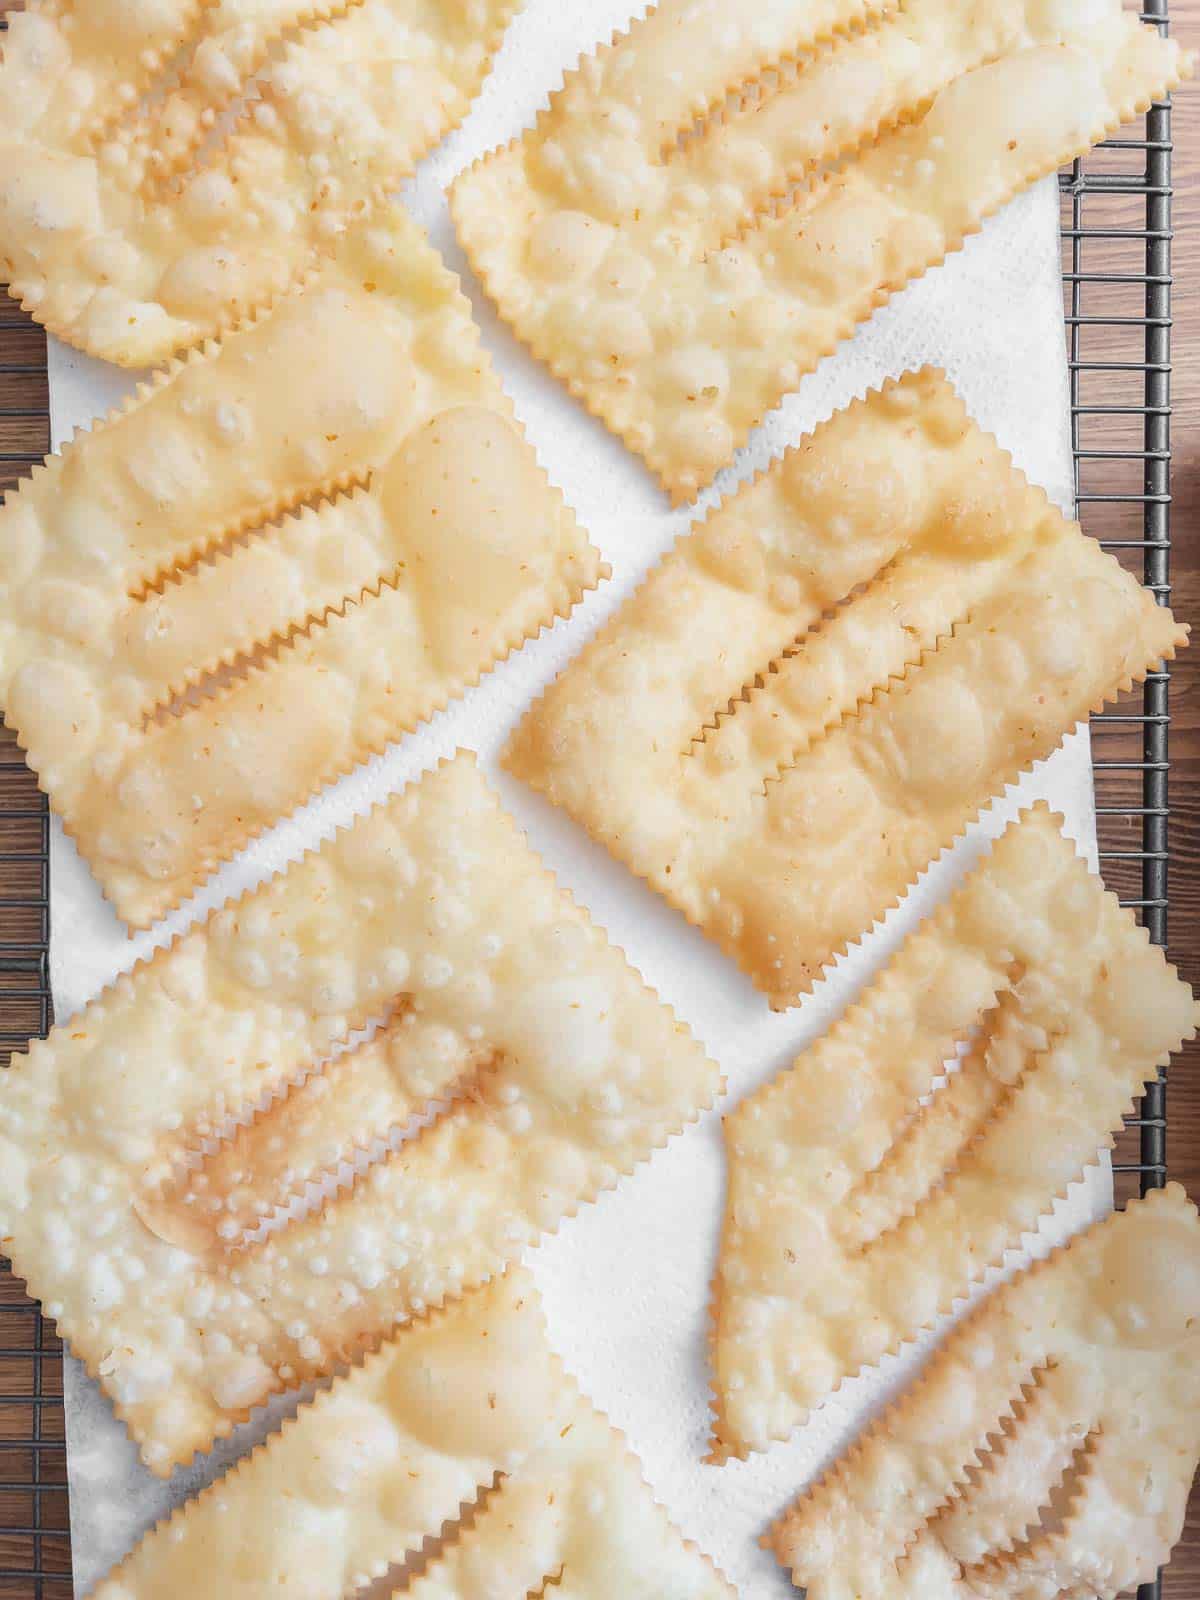 deep-fried chiacchiere on a cooling rack